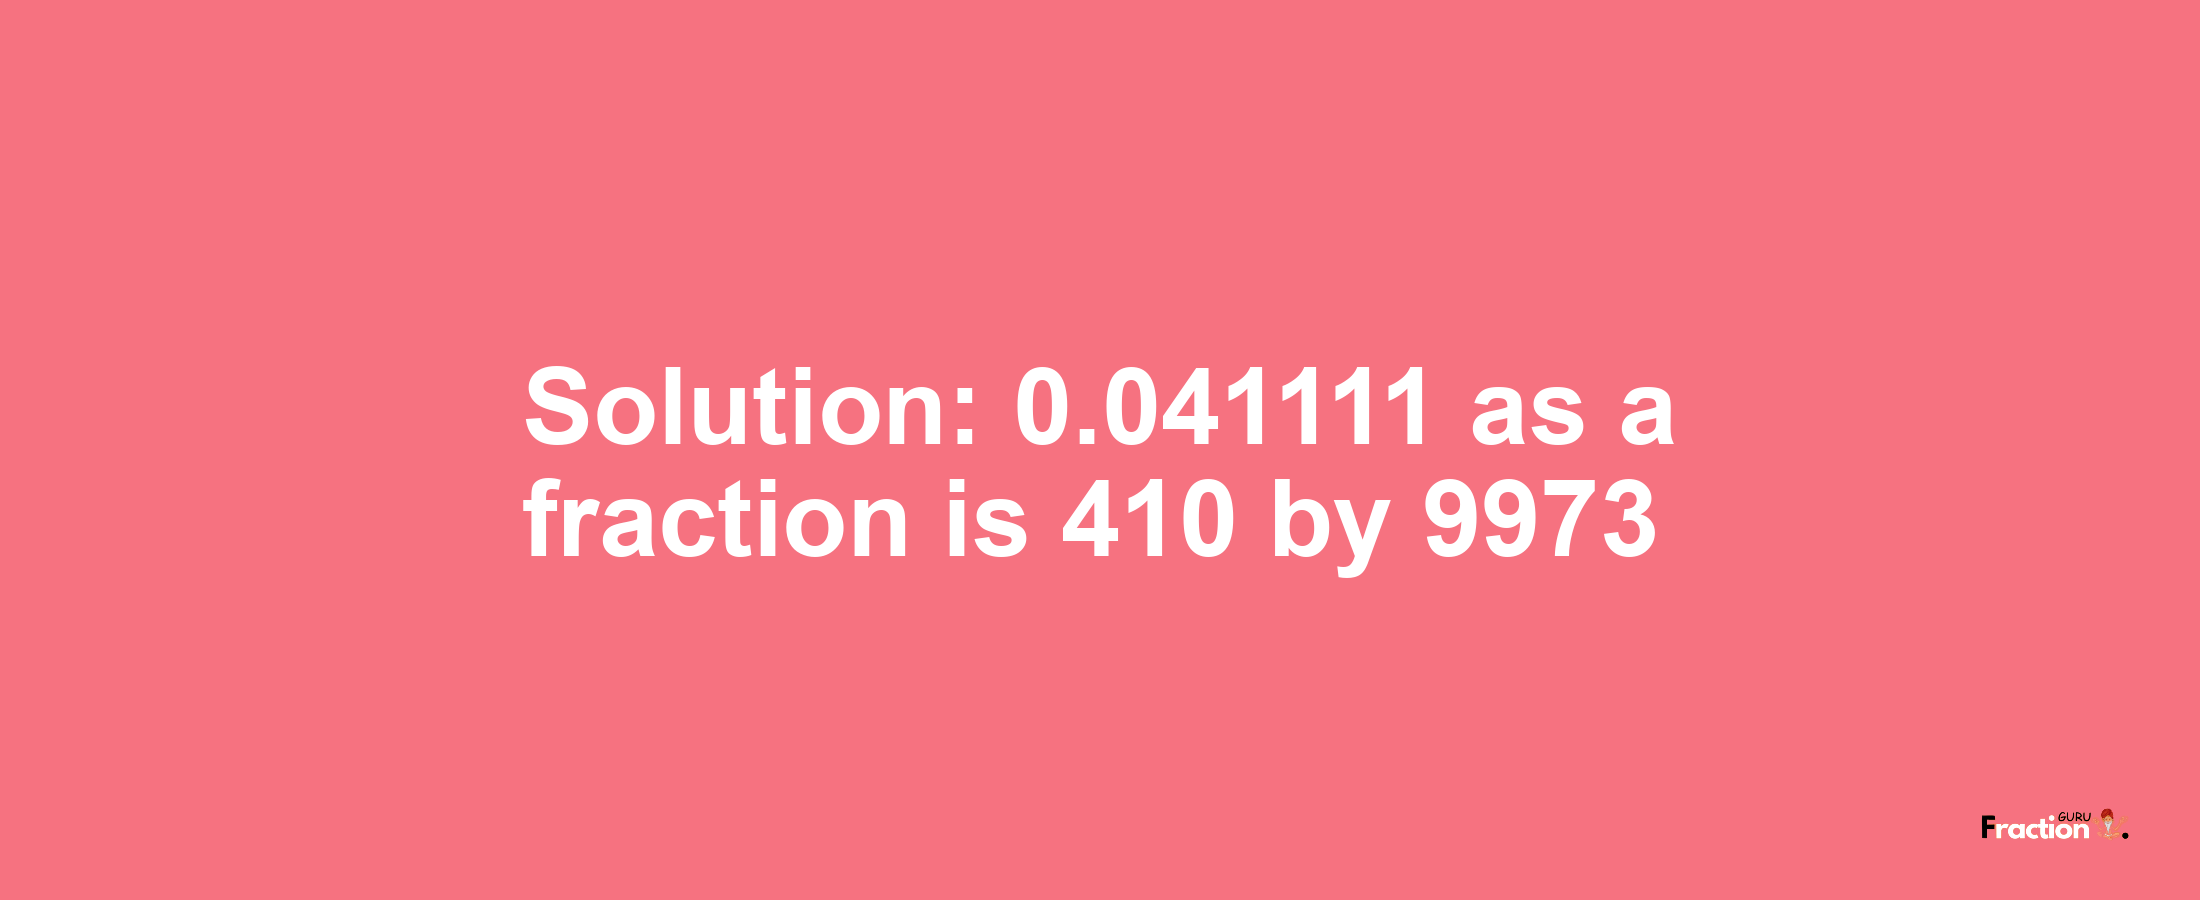 Solution:0.041111 as a fraction is 410/9973